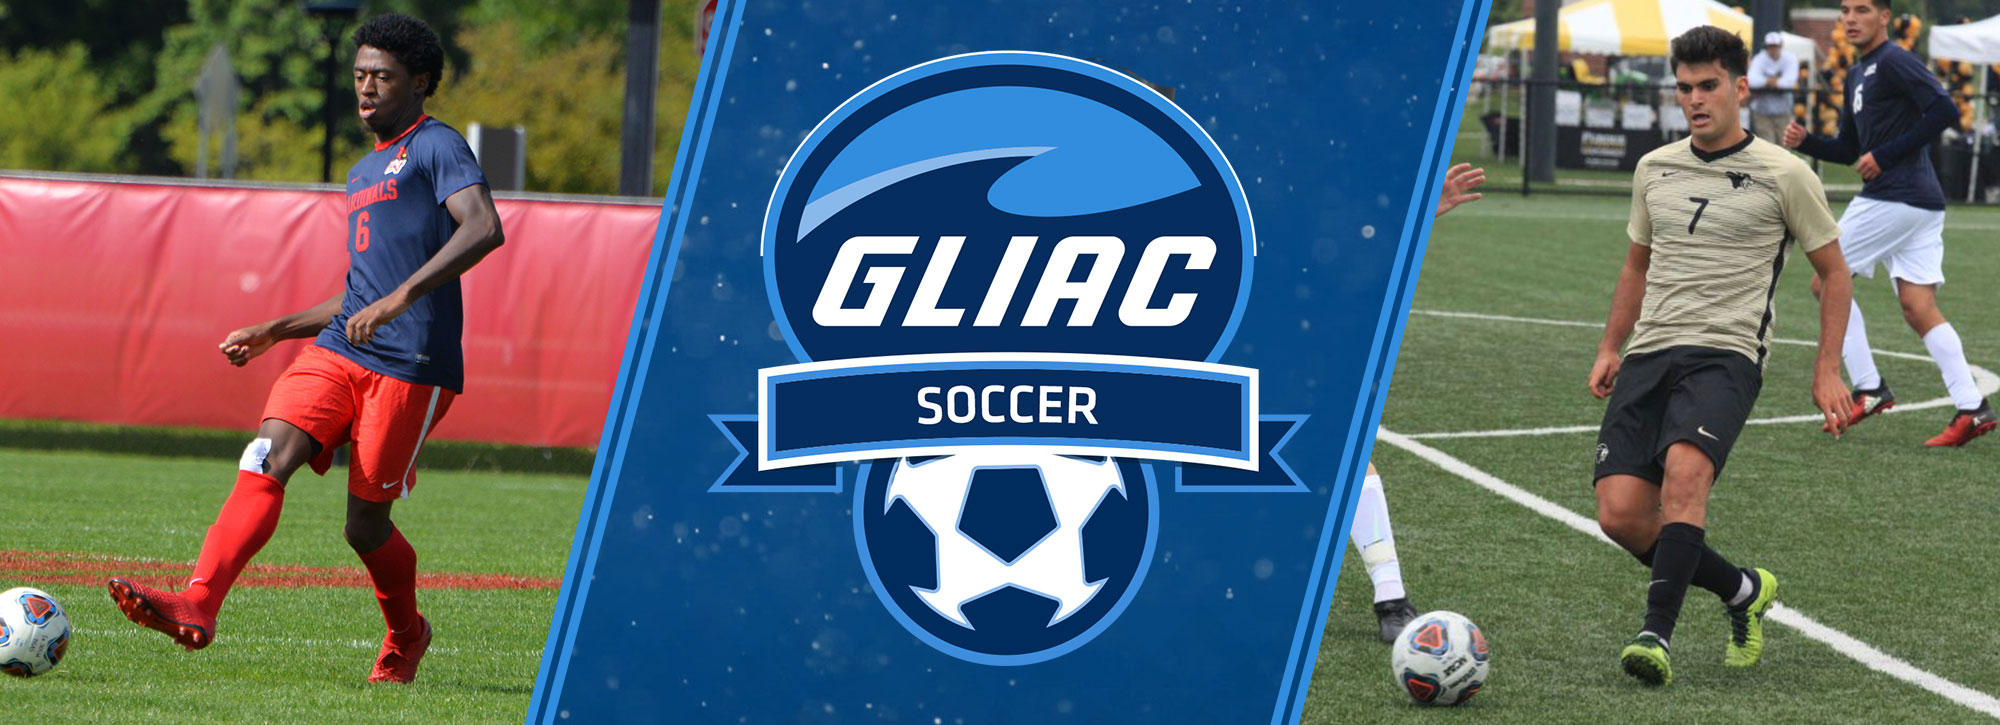 Purdue Northwest's Serna, Saginaw Valley's Sinclair Collect GLIAC Men's Soccer Weekly Honors